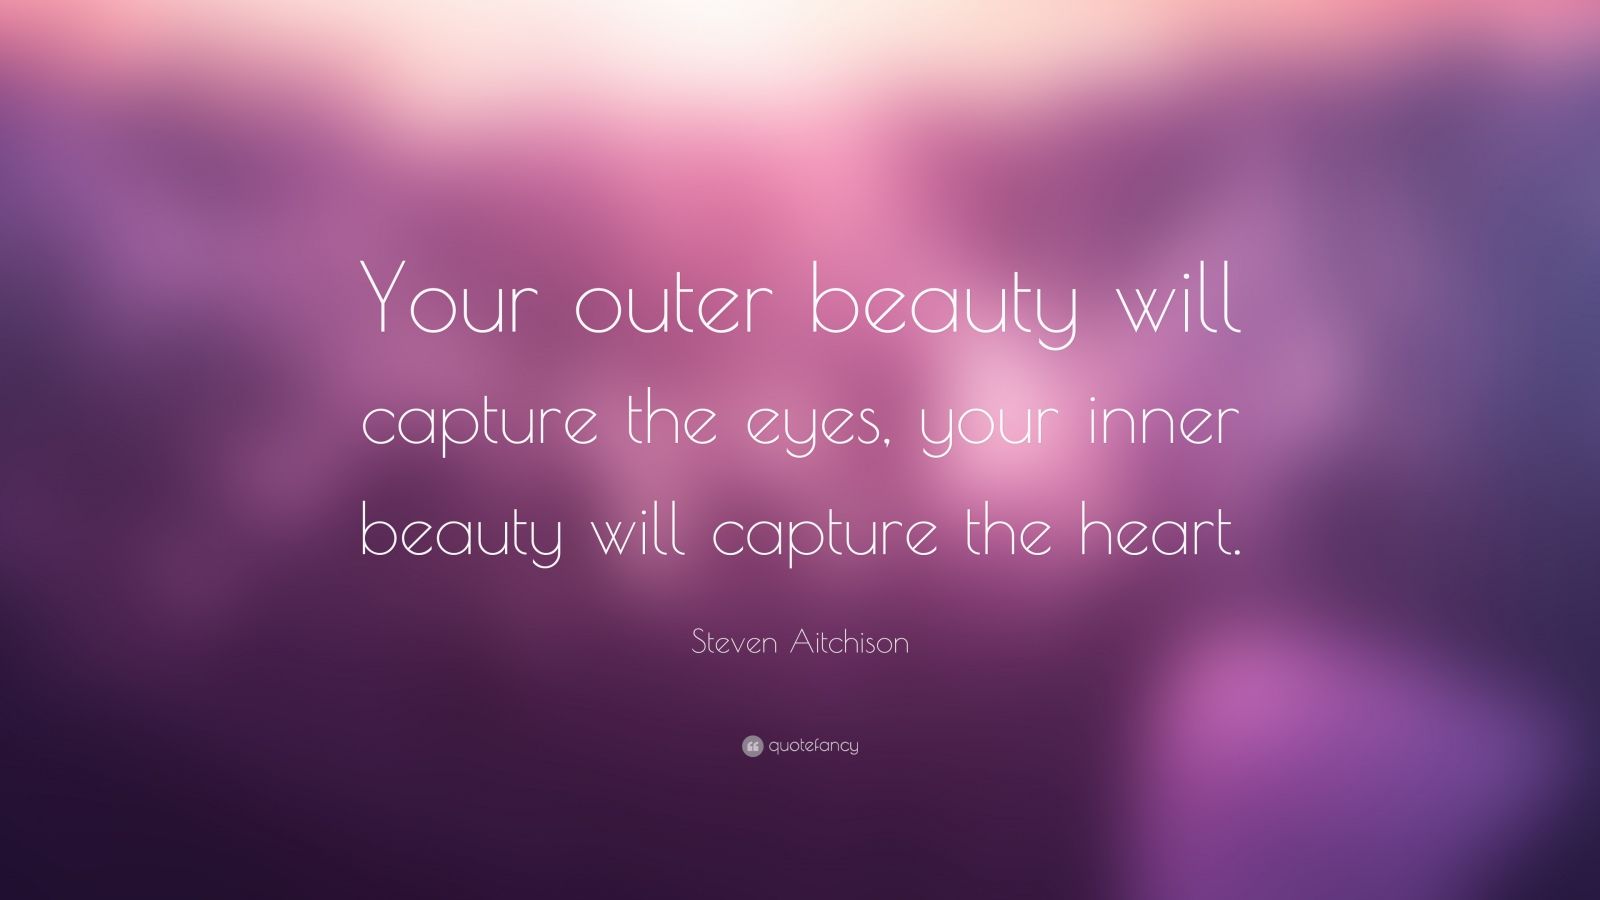 Beauty Quotes (30 wallpapers) - Quotefancy